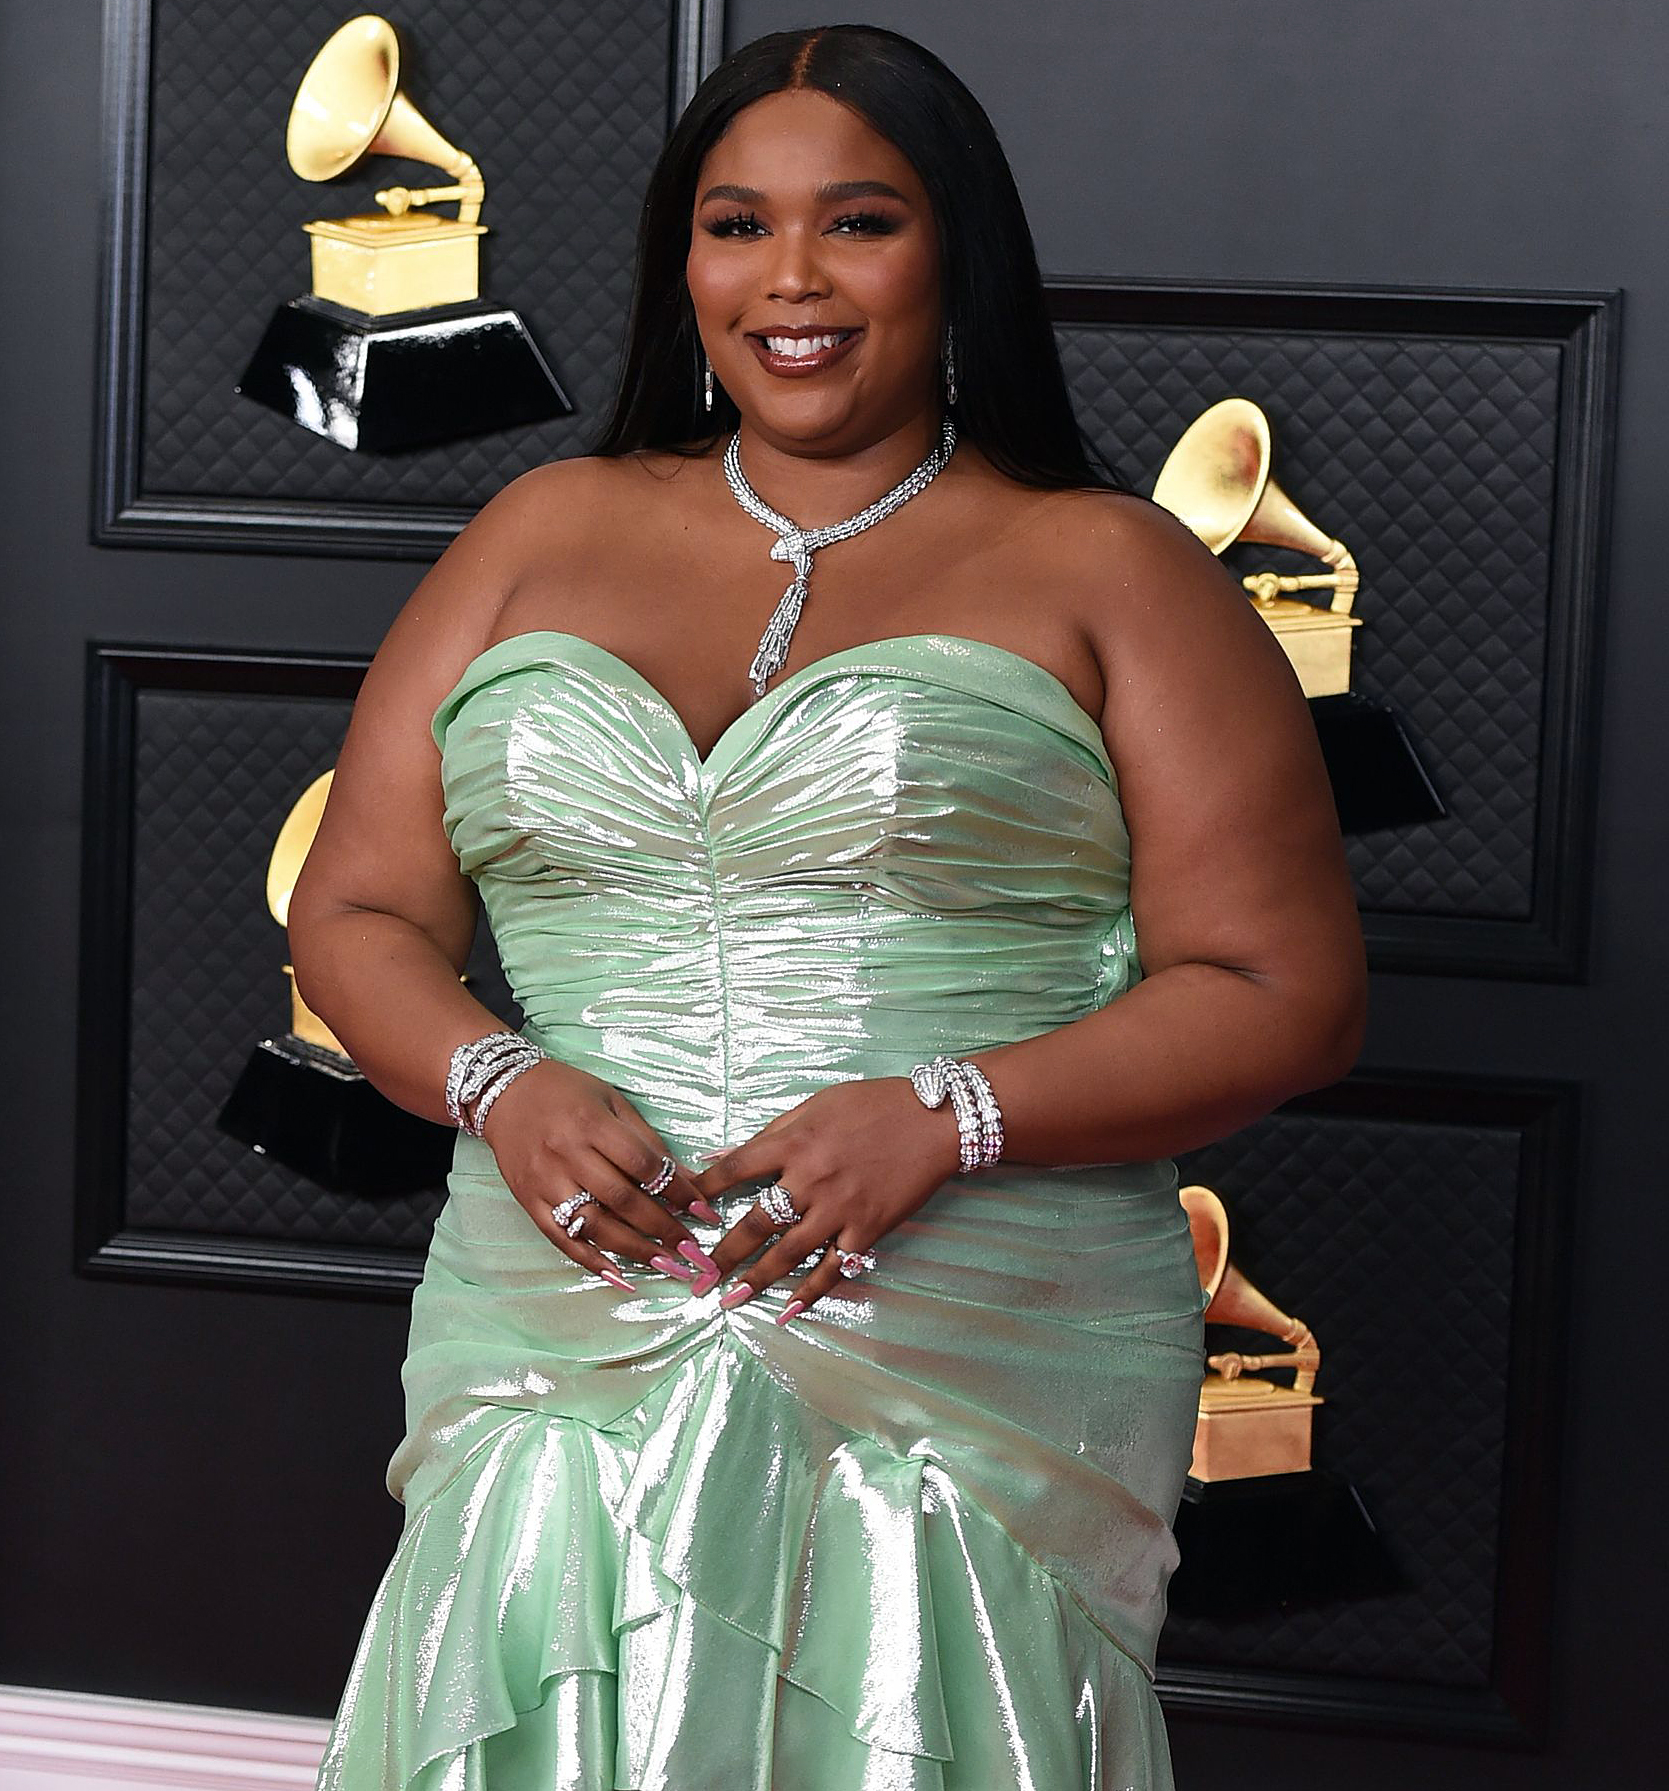 Lizzo's Yitty shapewear vs Universal Standard - Apparently this